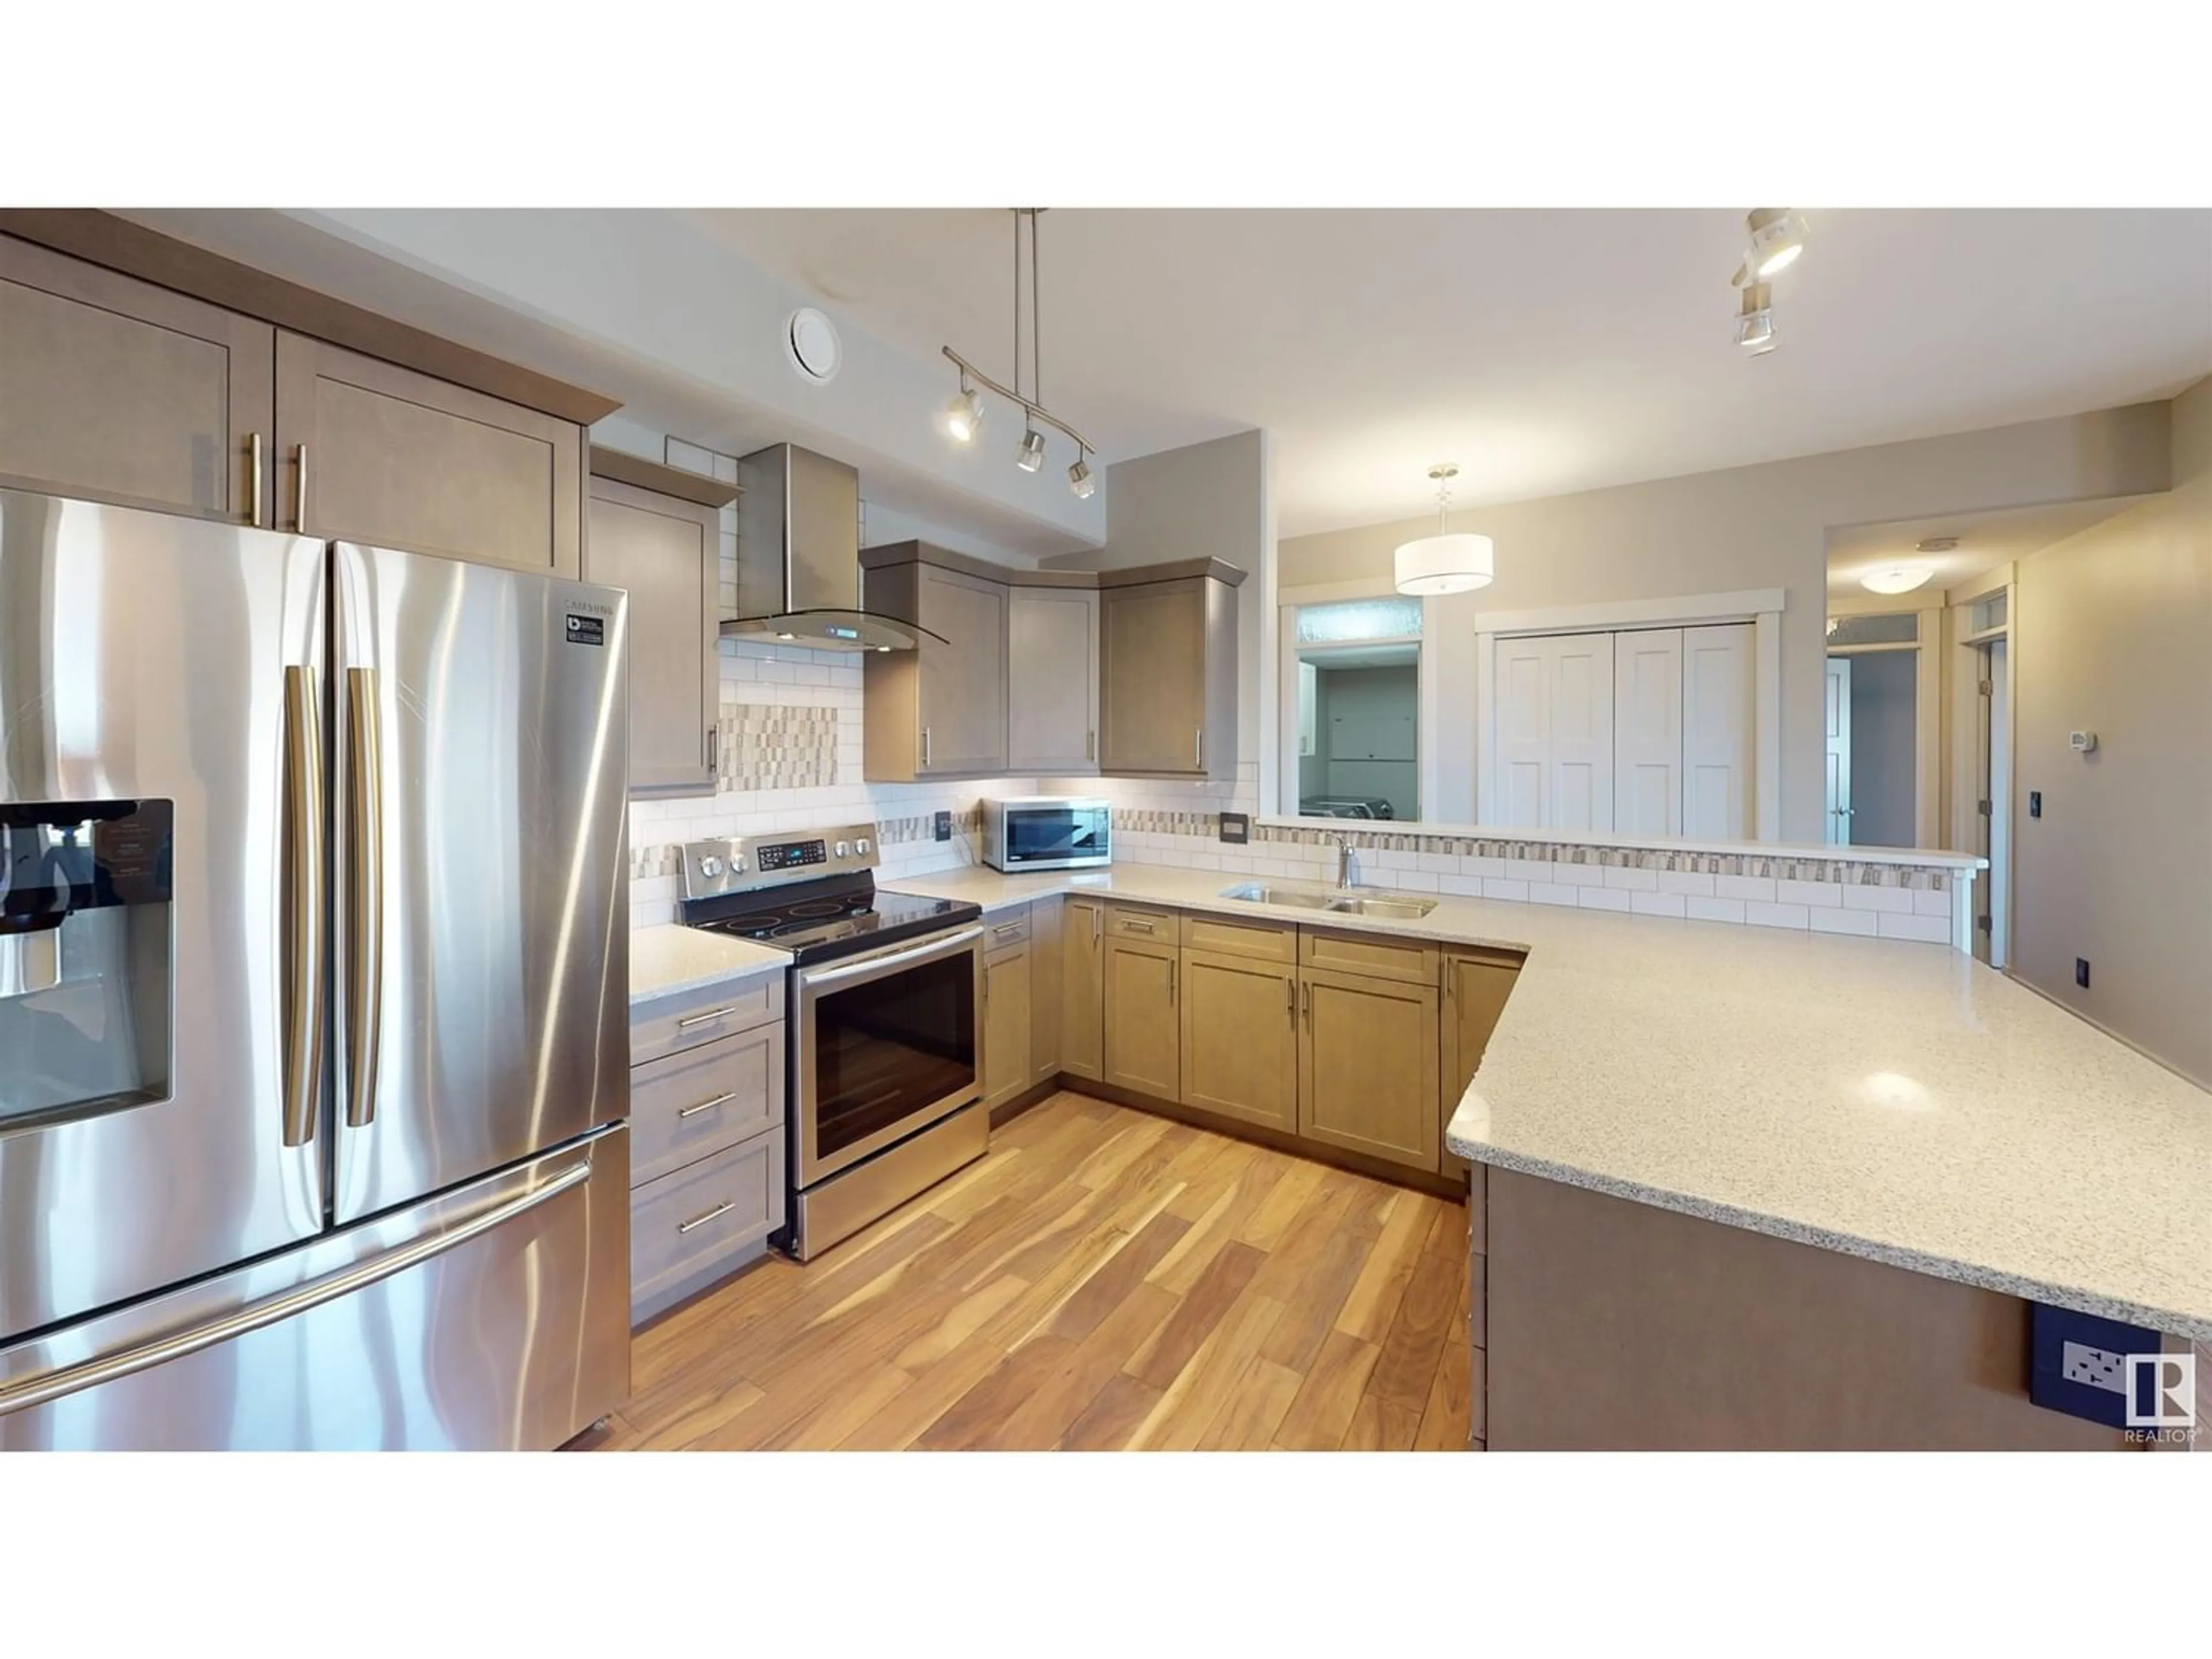 Contemporary kitchen for #406 5201 Brougham DR, Drayton Valley Alberta T7A0C8